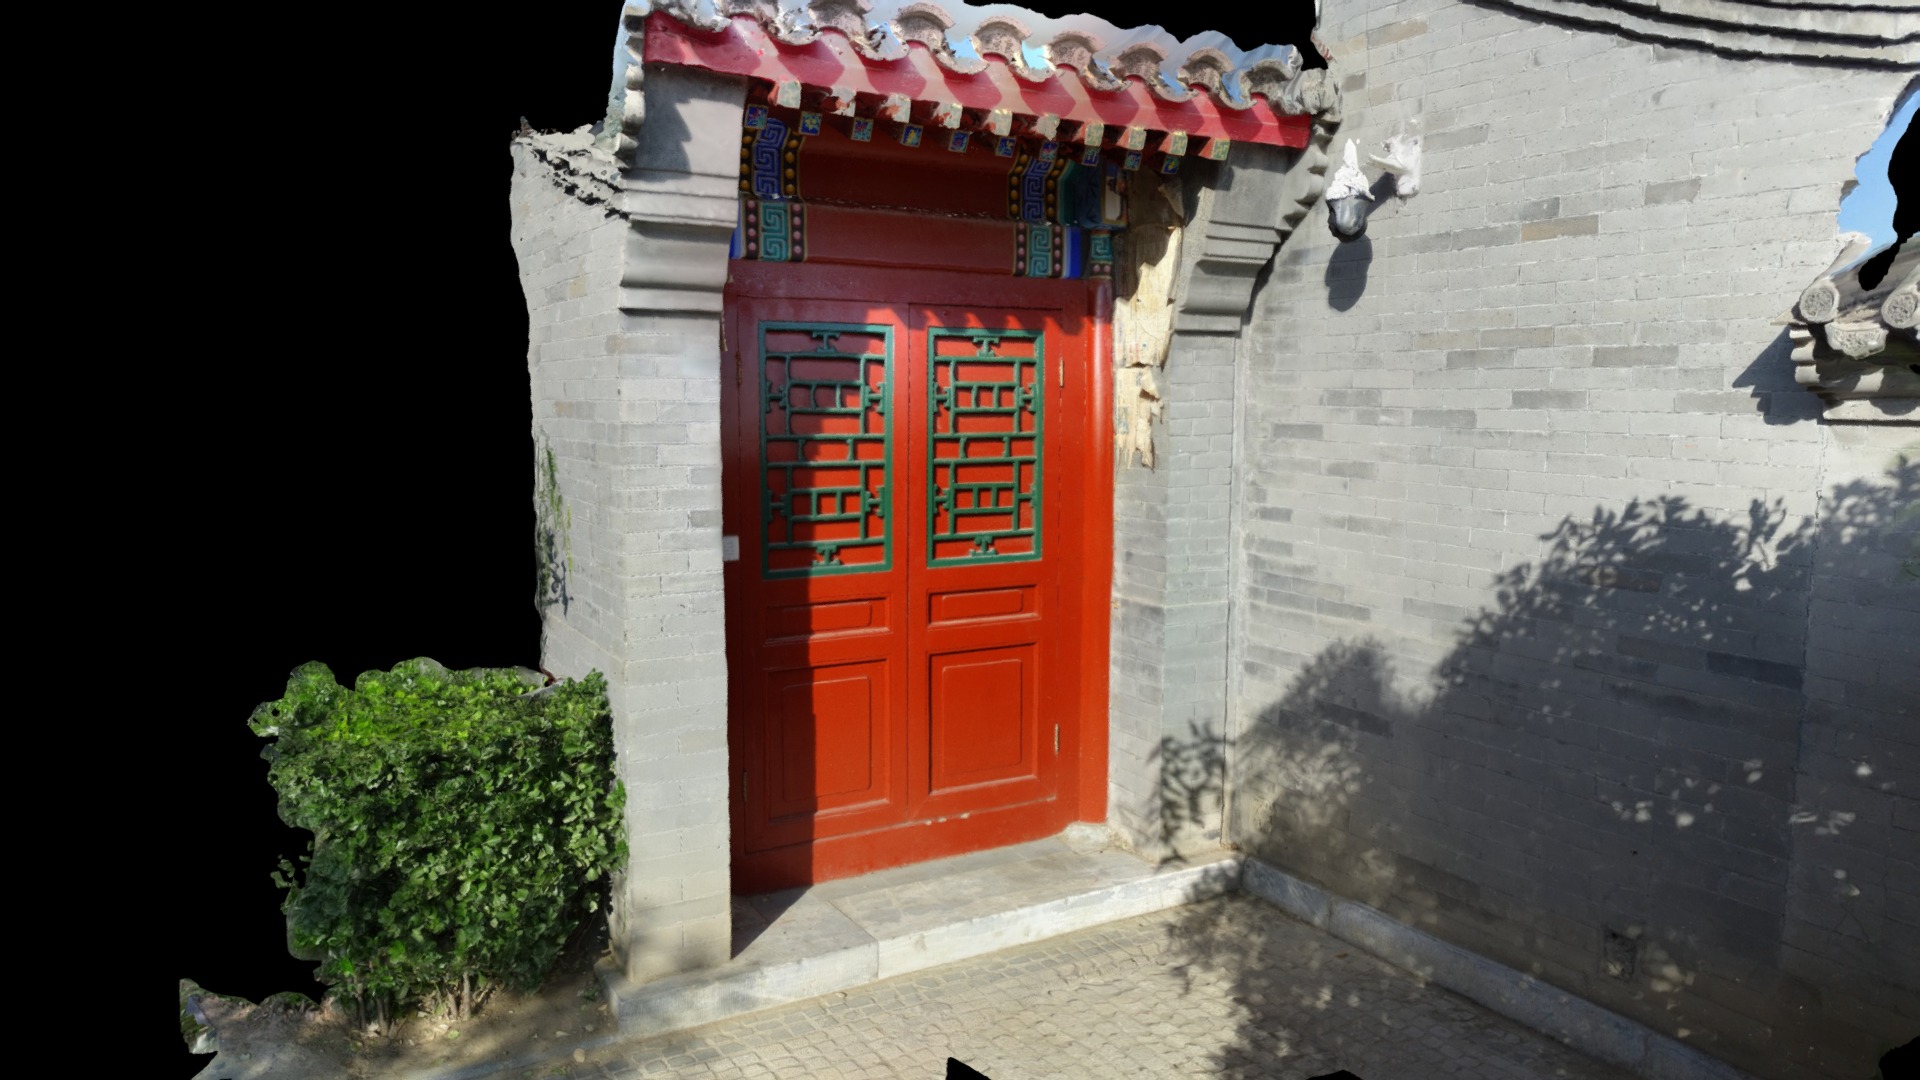 3D model 2016-10 – Beijing 14 - This is a 3D model of the 2016-10 - Beijing 14. The 3D model is about a red door on a stone building.